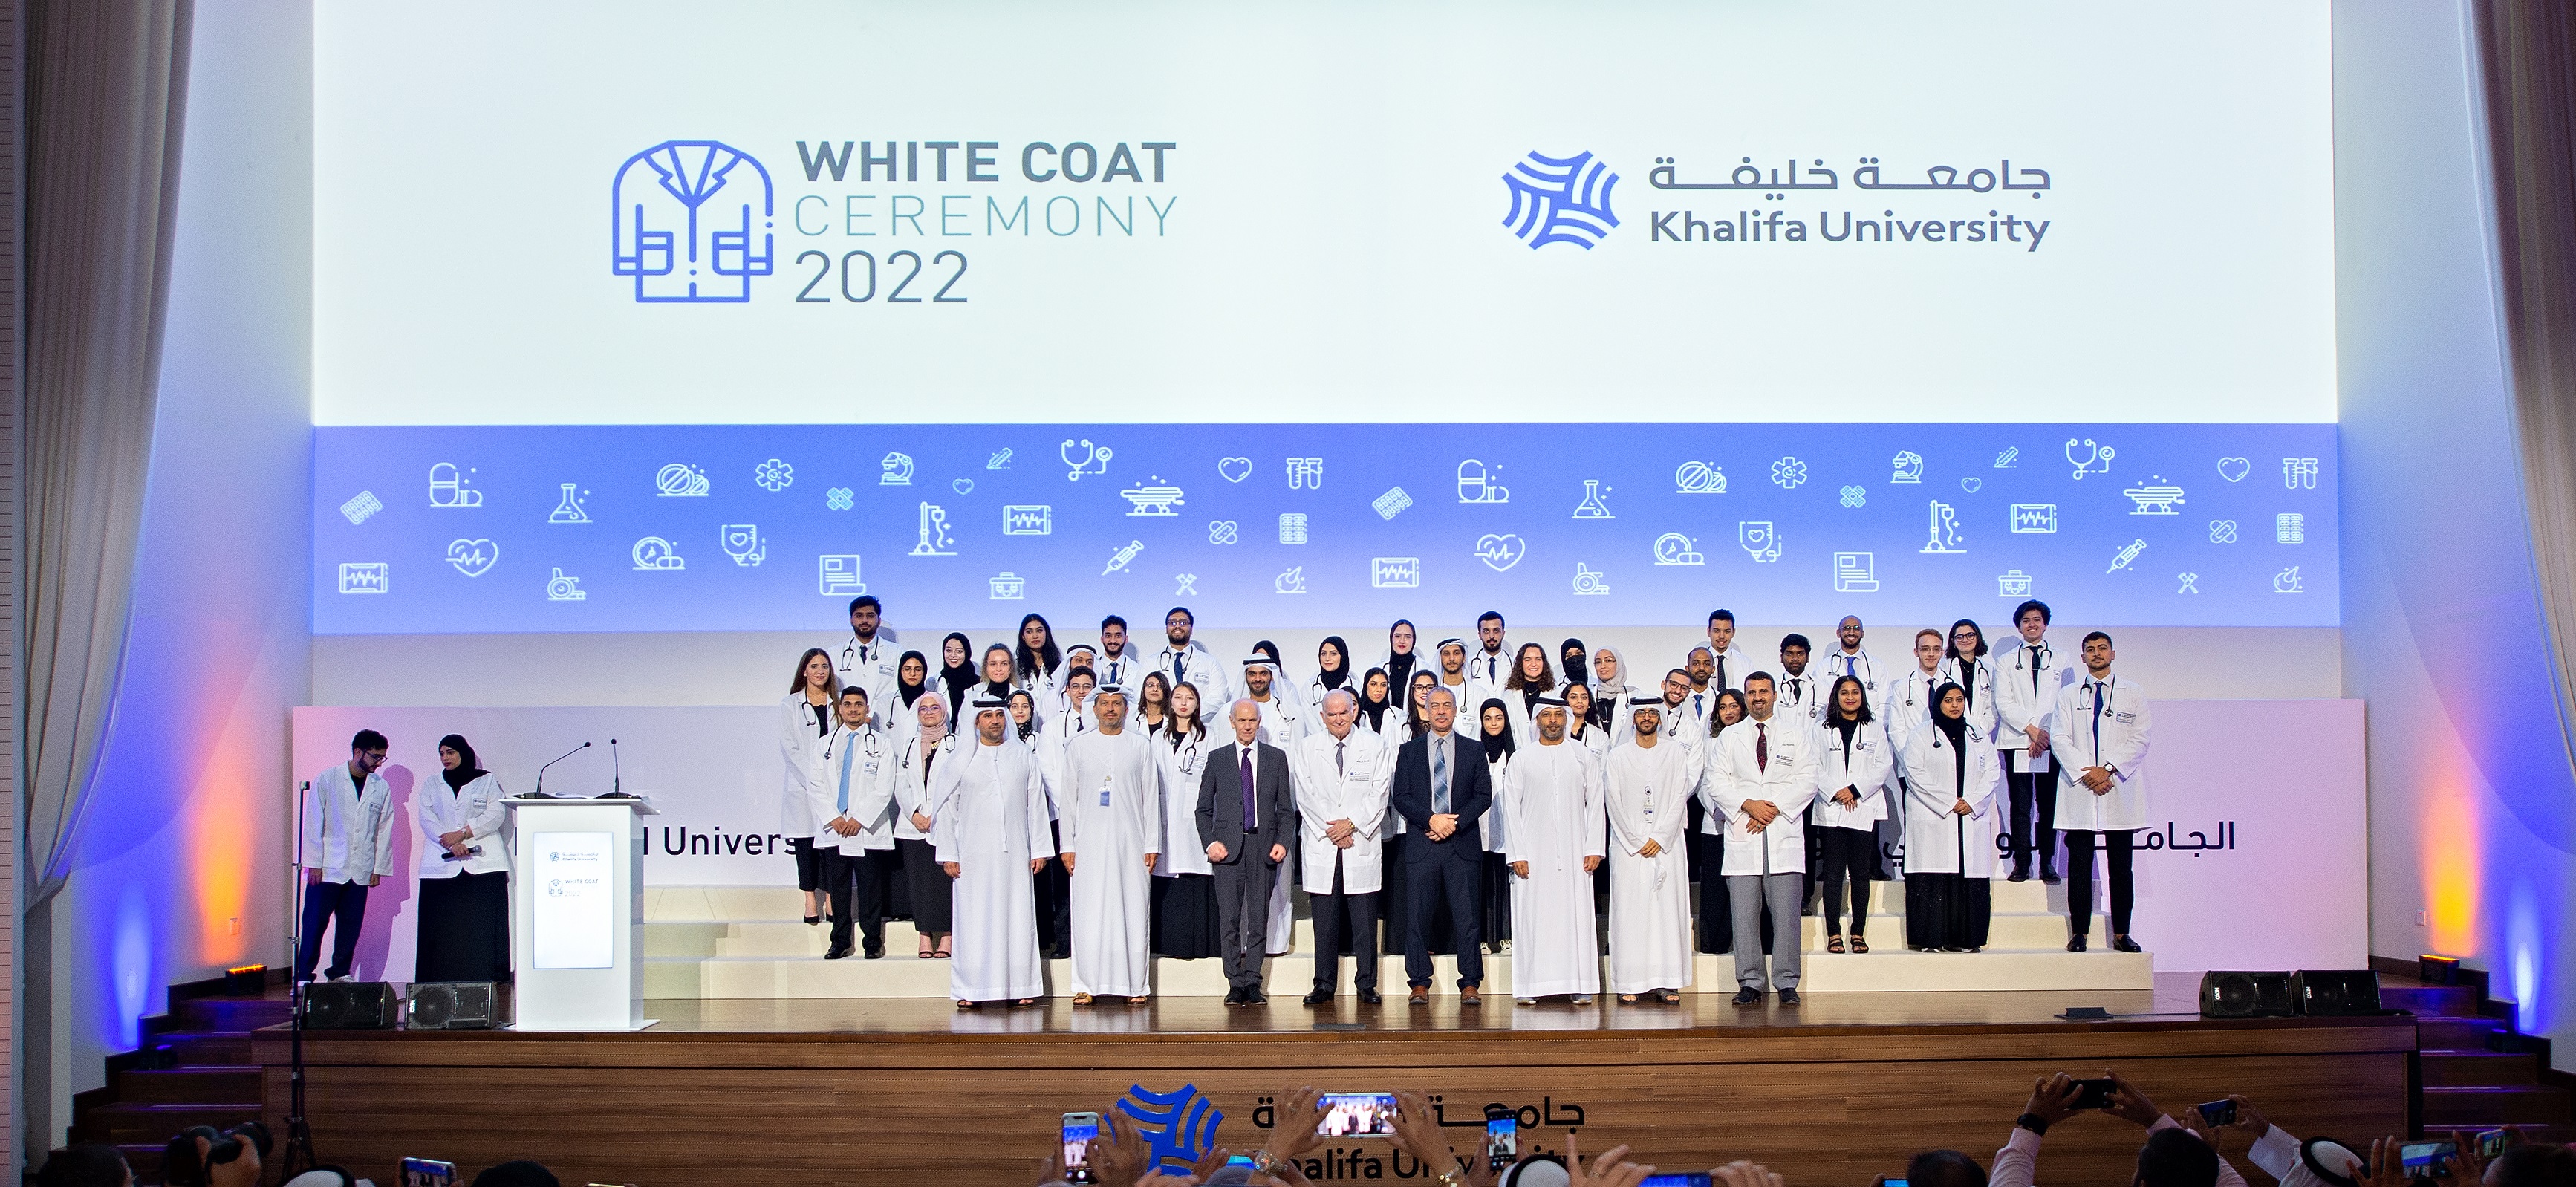 Khalifa University College of Medicine and Health Sciences Organizes White Coat Ceremony for Fourth Cohort of Medical Students